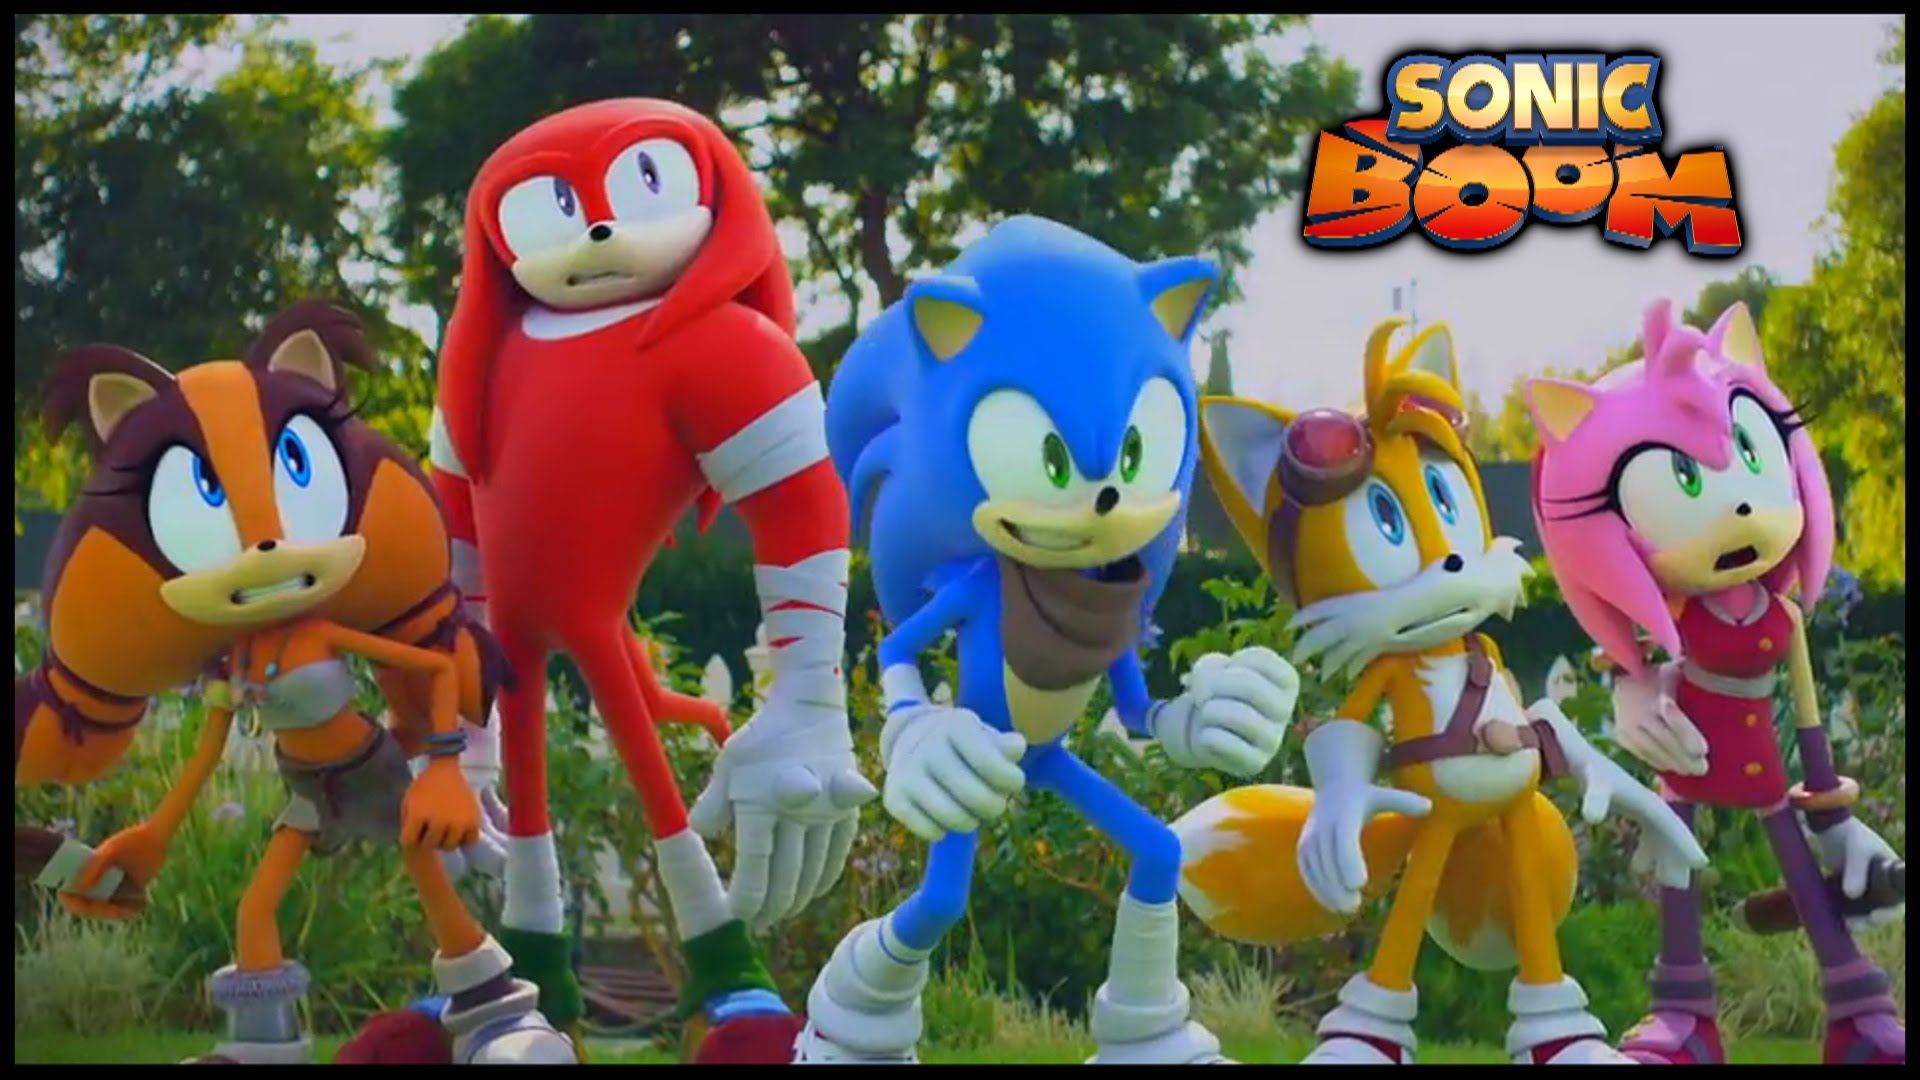 Sonic Boom wallpapers, TV Show, HQ Sonic Boom pictures.